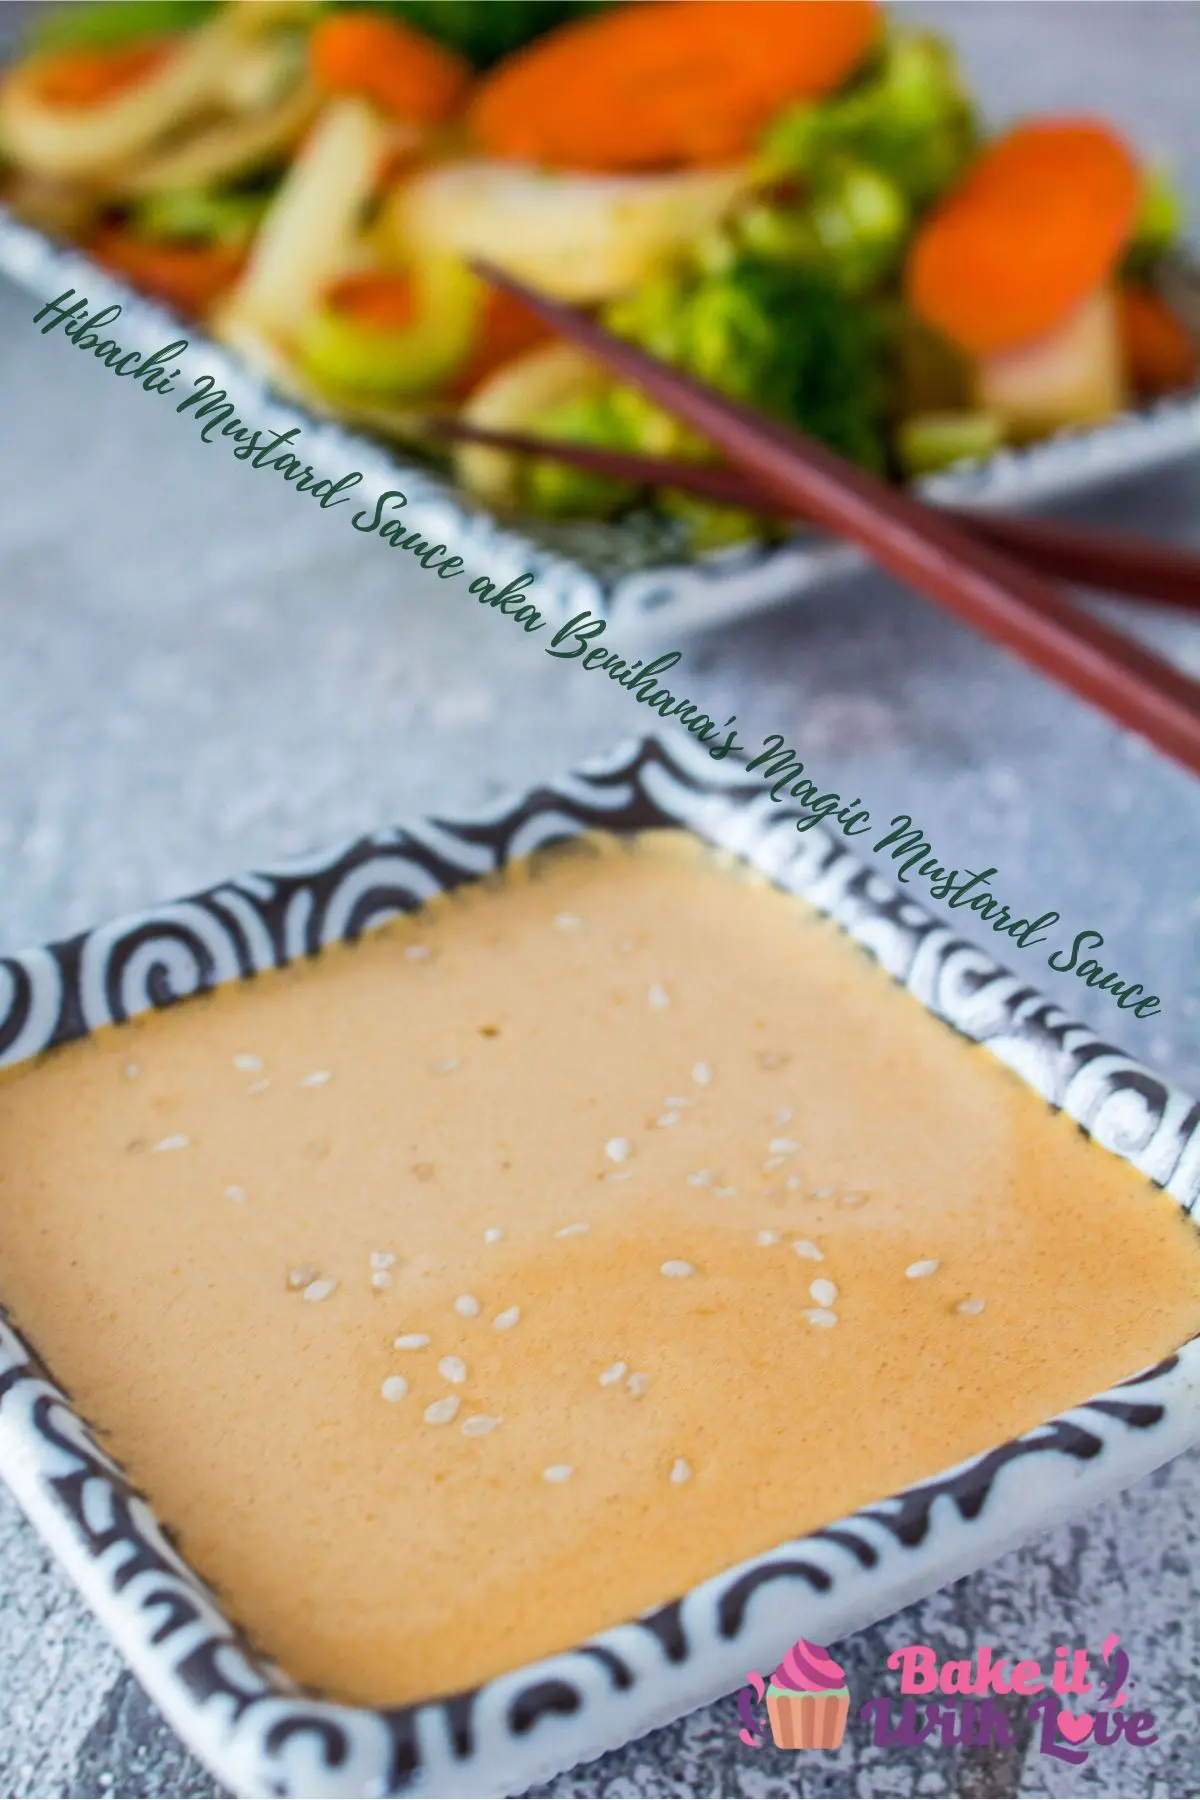 Delightfully creamy hibachi mustard dipping sauce made from toasted sesame seeds, soy sauce, ground mustard, heavy cream and a pinch of garlic powder!